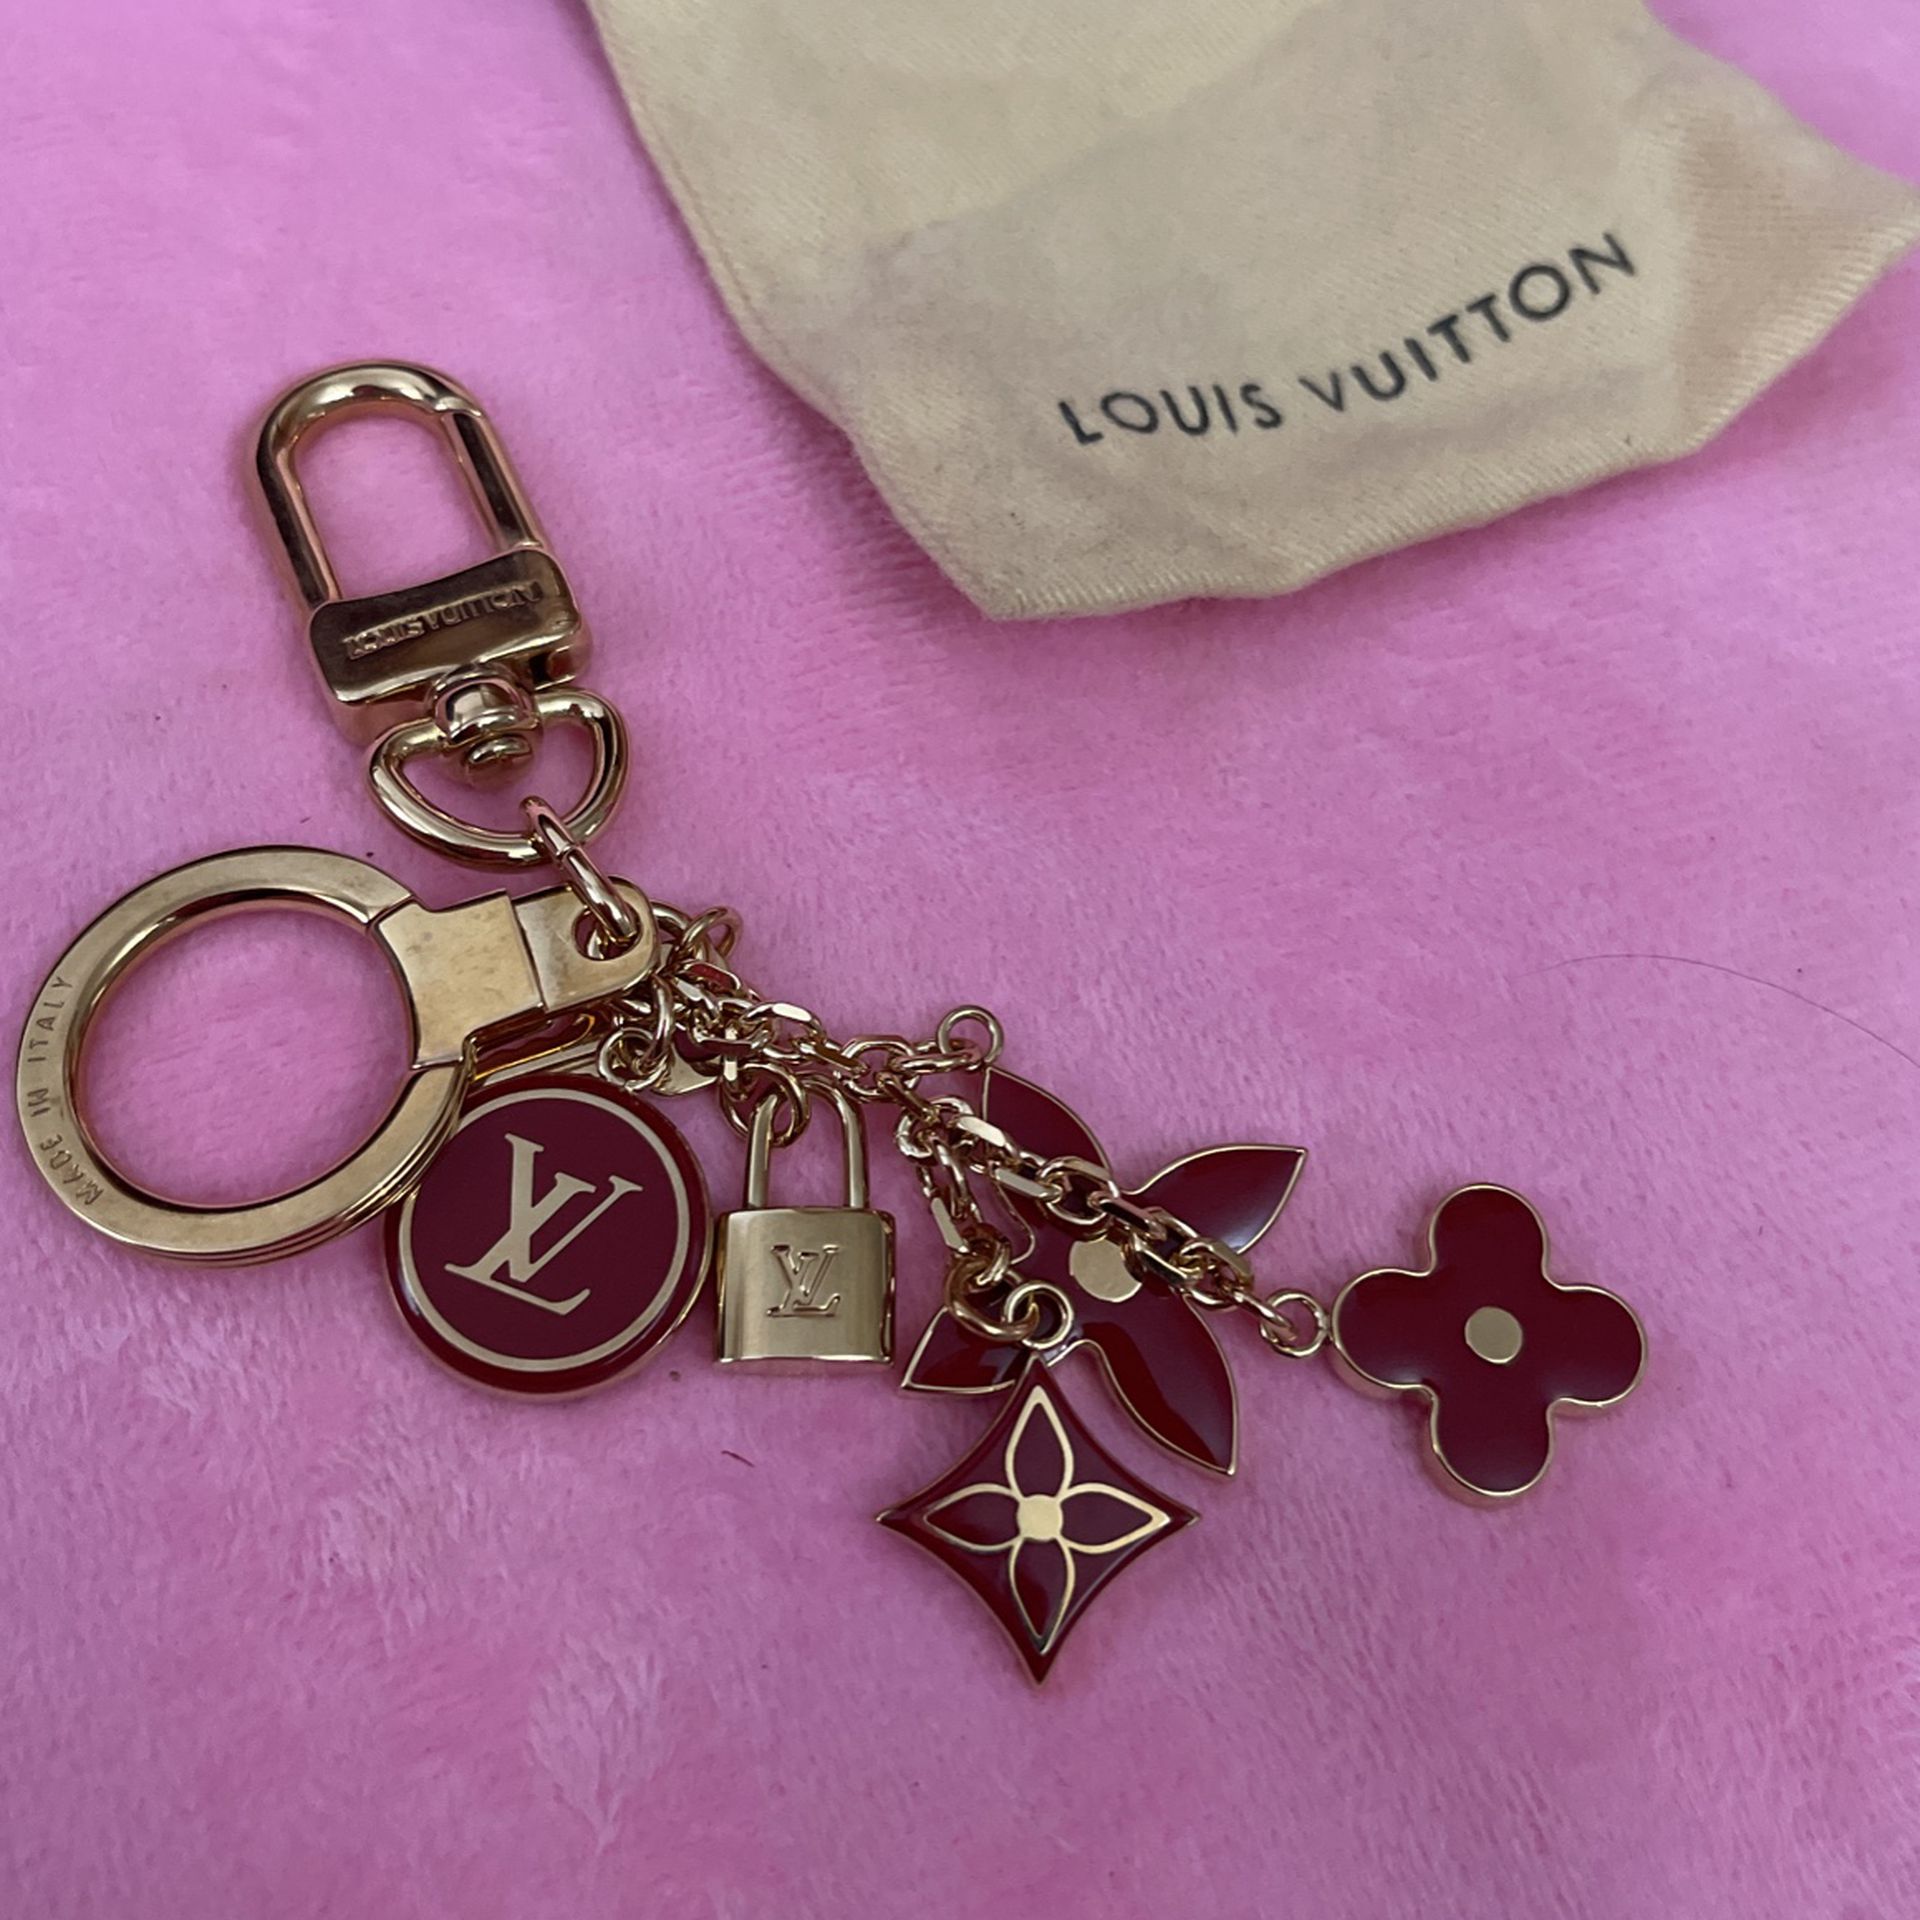 2393 HMTT MONOGRAM FORTUNE COOKIE CHARM & KEY HOLDER, BOX, BAG, INCLUDED -  NEW for Sale in Gallatin, TN - OfferUp